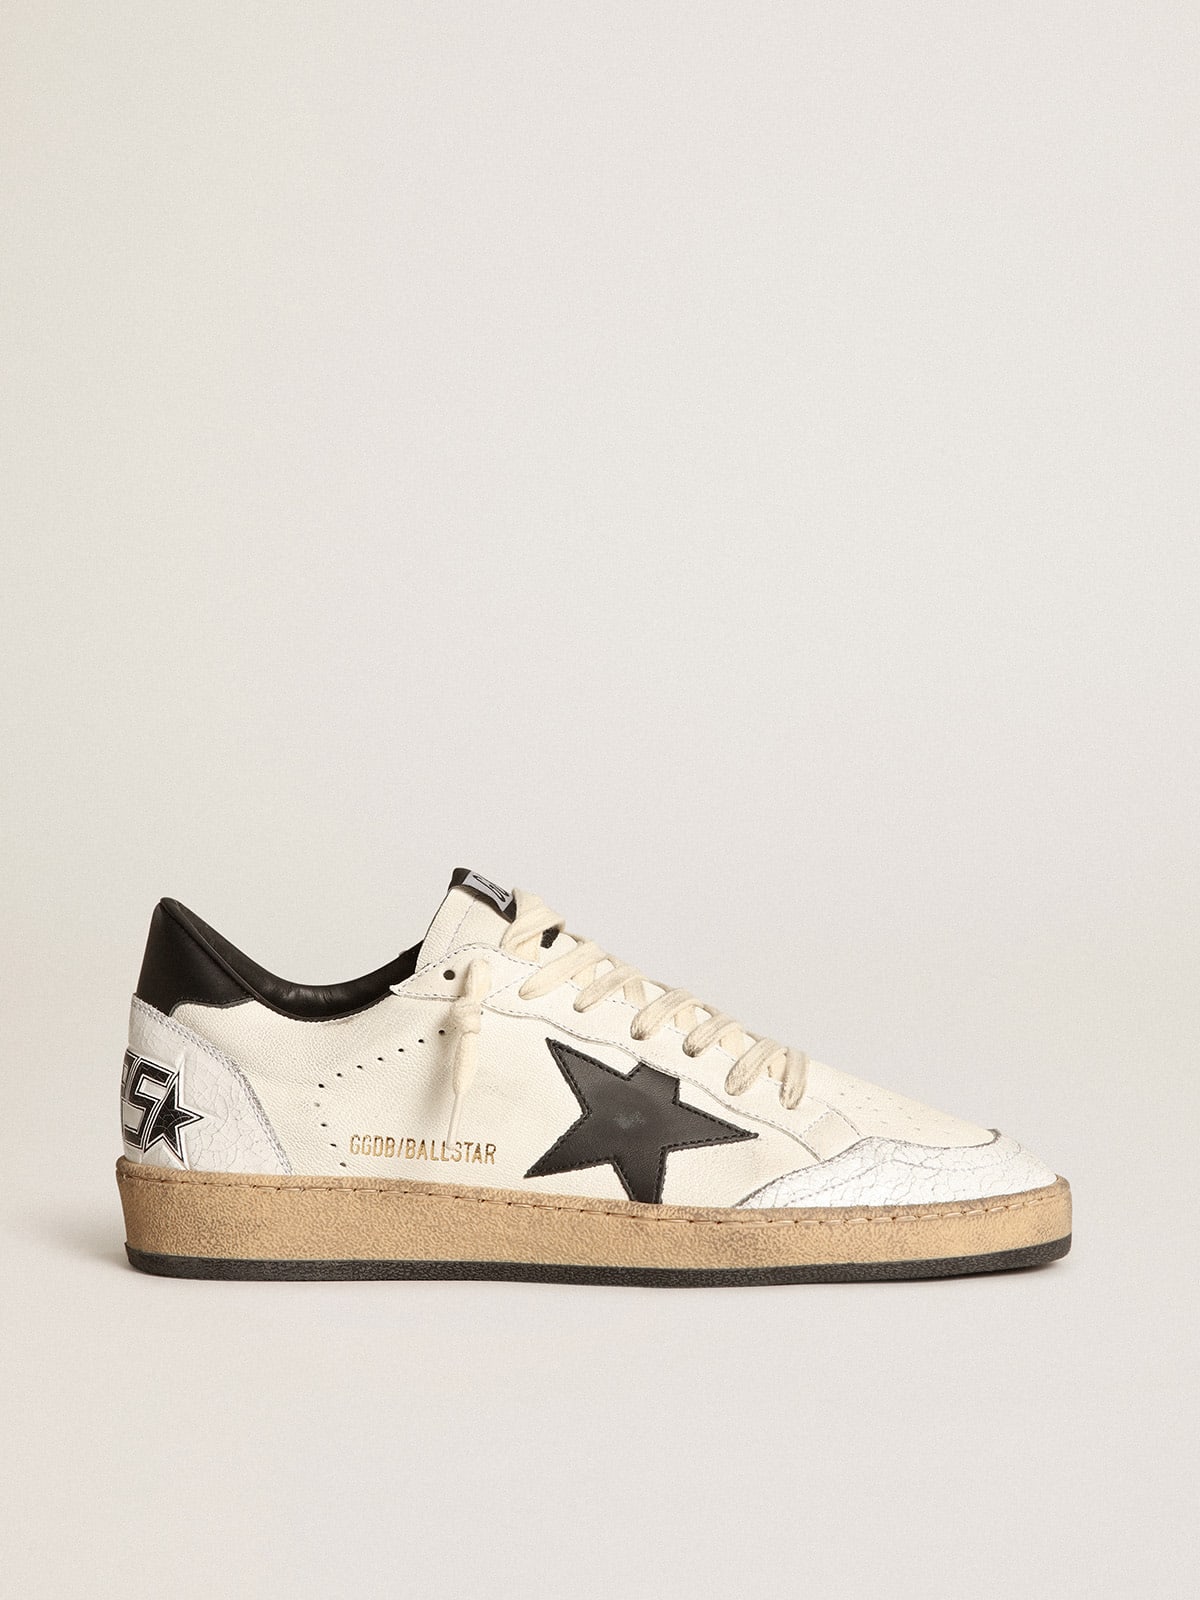 Men's Ball Star sneakers in white nappa leather with black leather star and heel tab